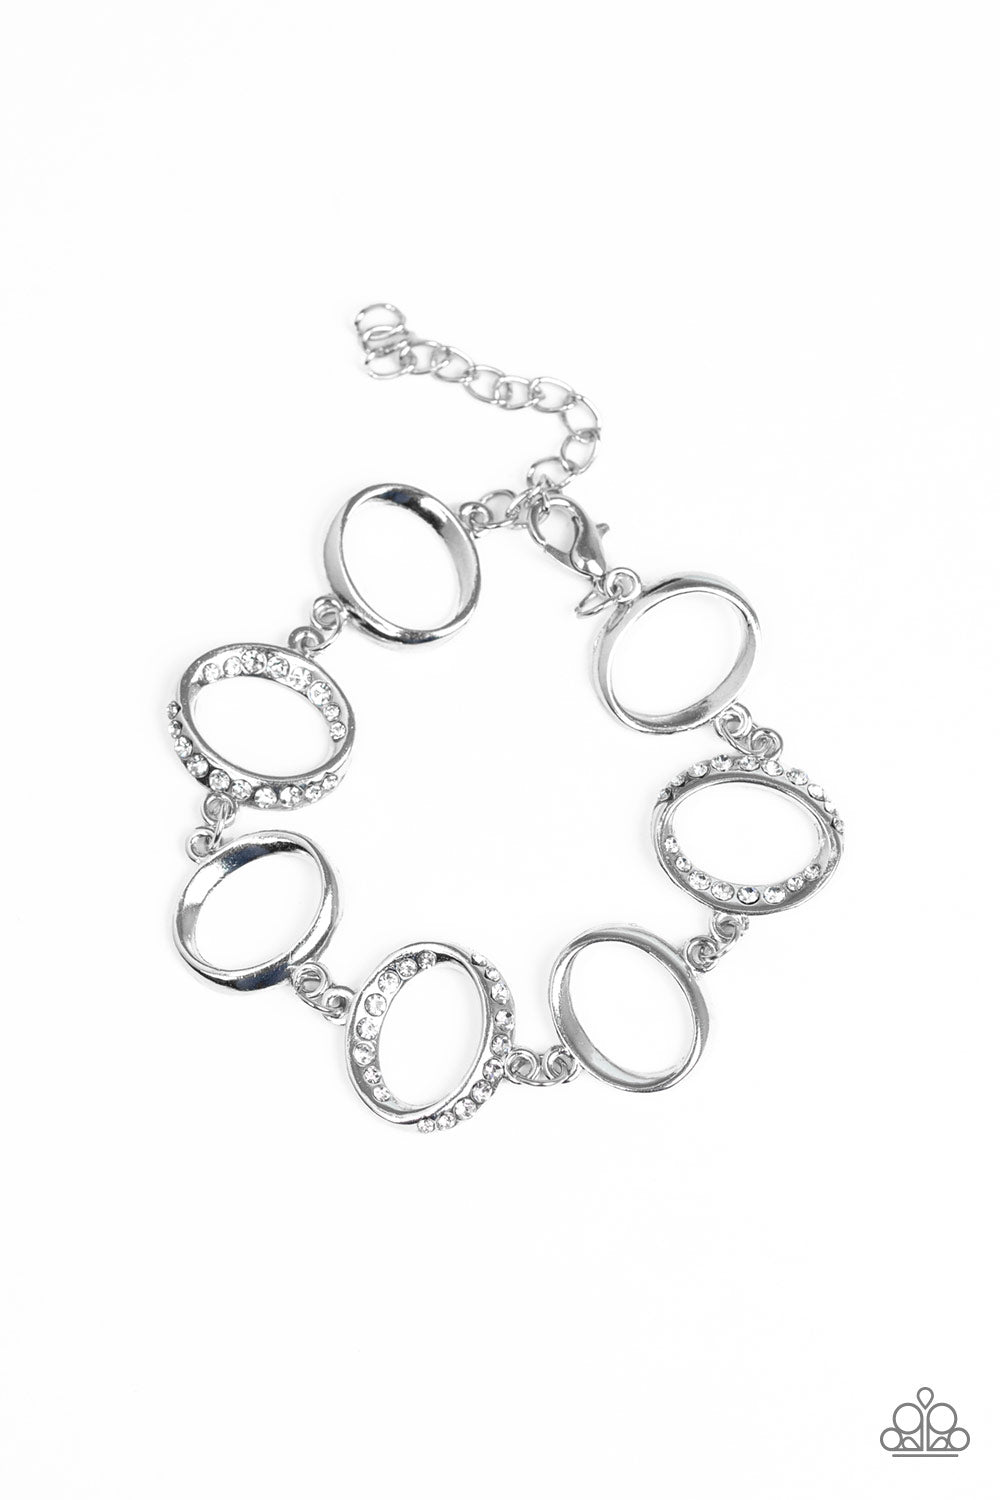 Paparazzi Accessories - Beautiful Inside and Out - White Bracelet